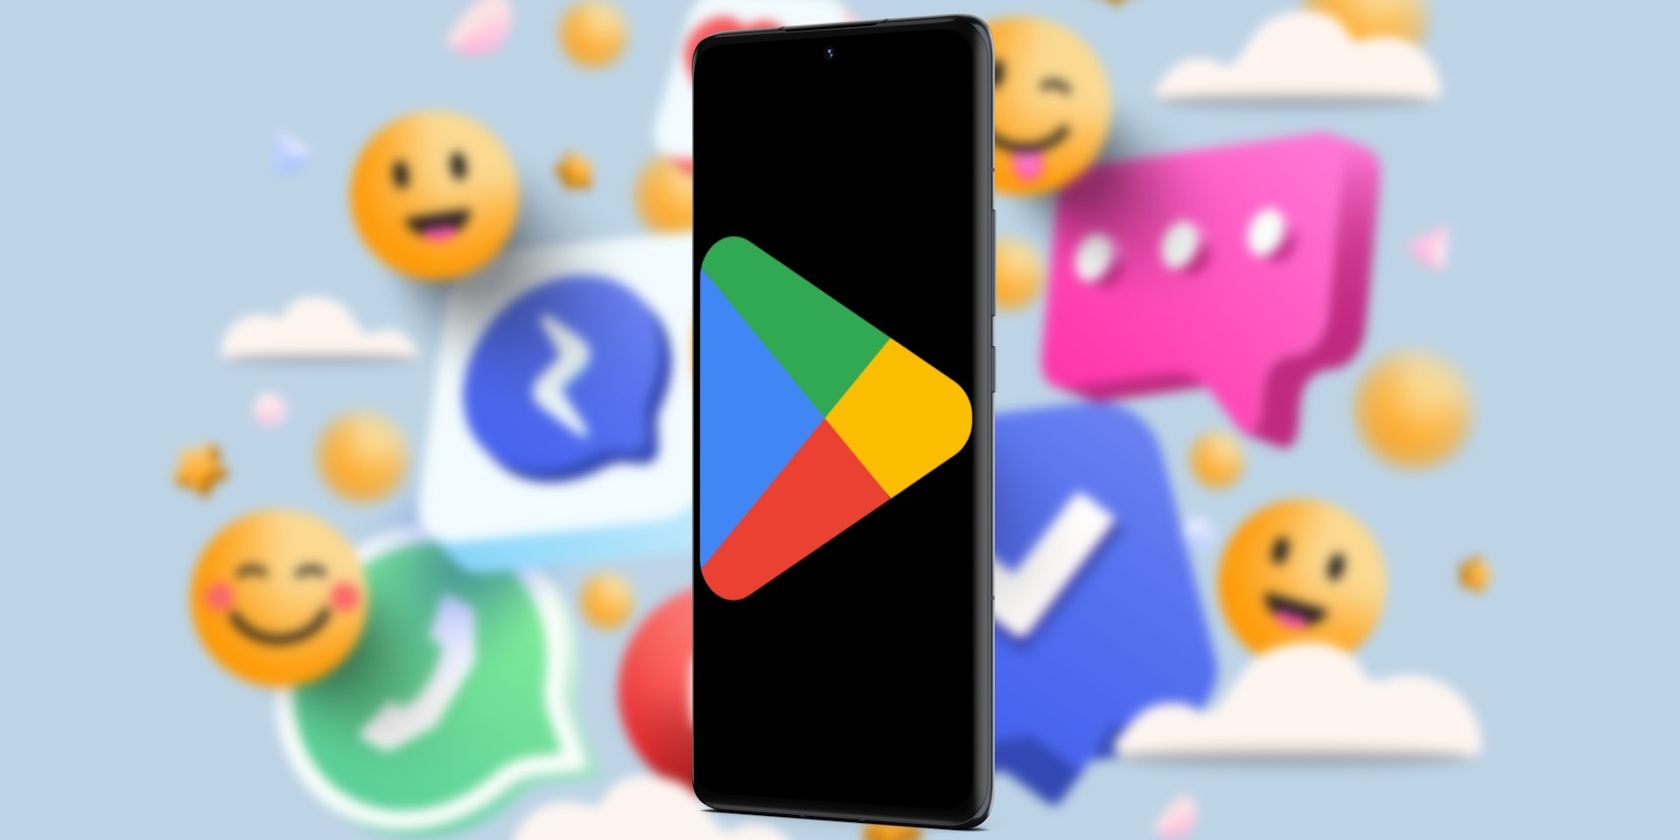 Play Store logo appearing on an Android phone with some emojis and app icons in a blurred background